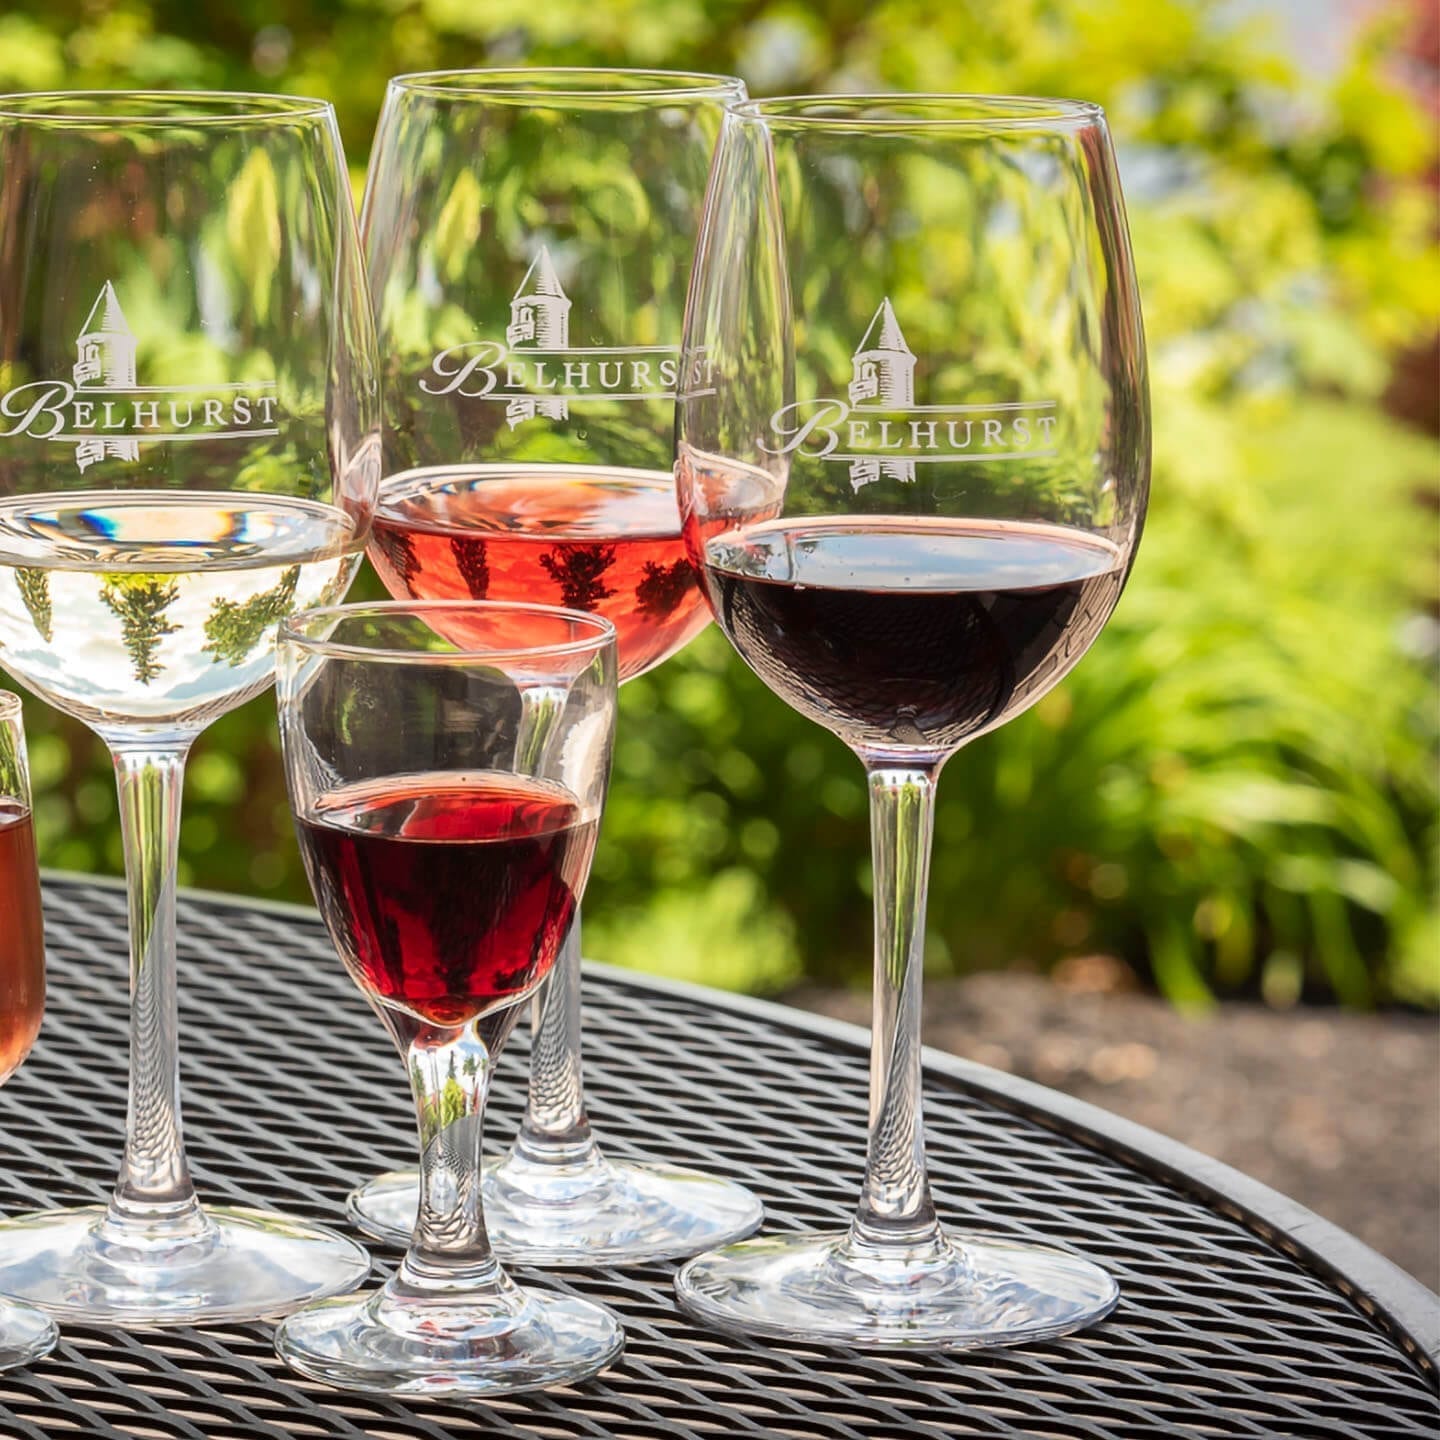 Assortment of wine glasses on a patio table.